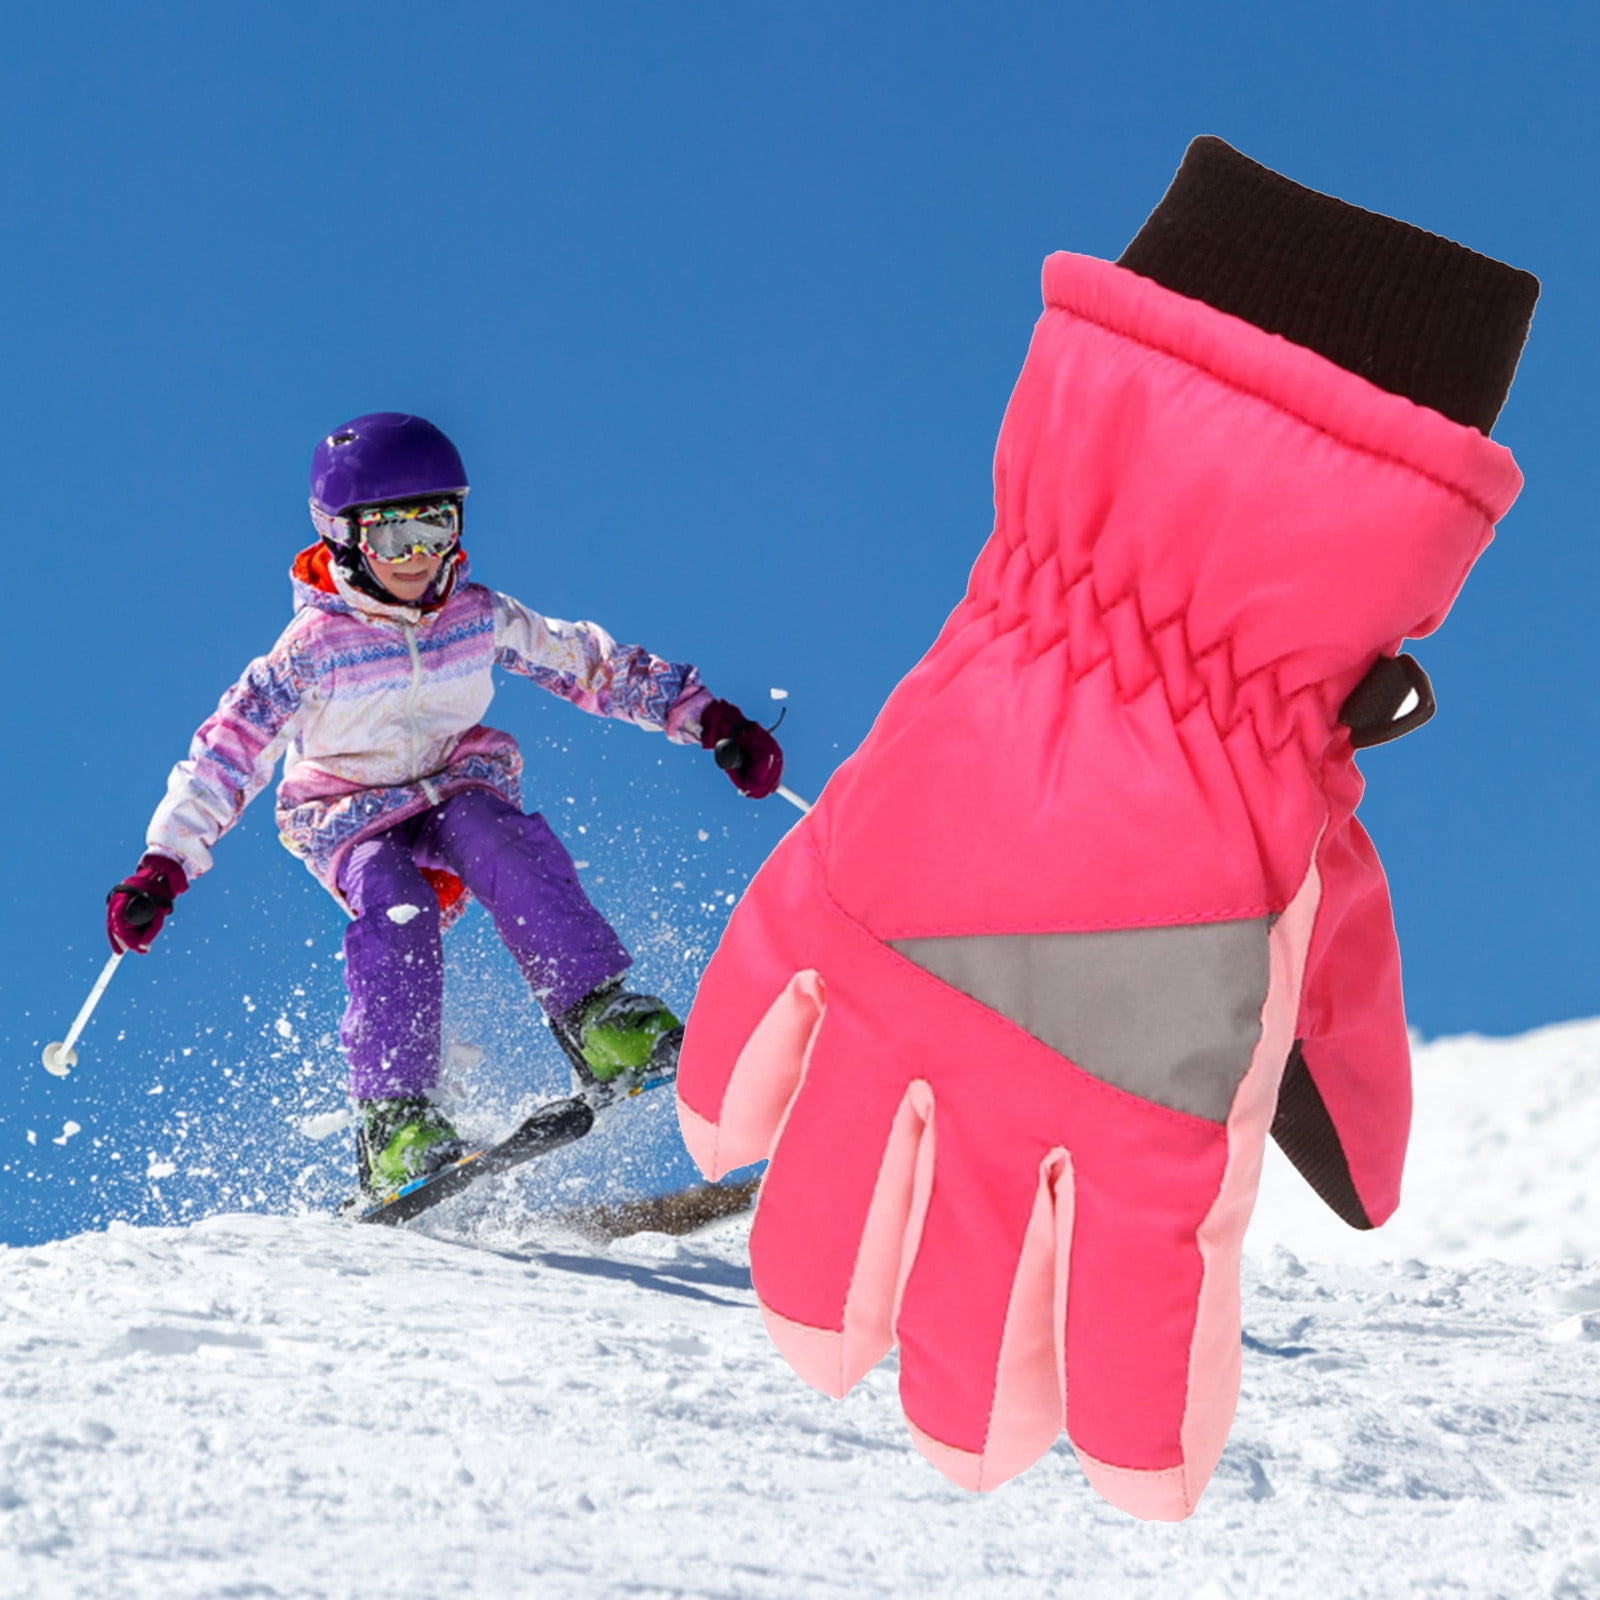 Warm Gloves Waterproof Winter Snow Ski Mittens for Girls Skiing/Cycling Pink XS